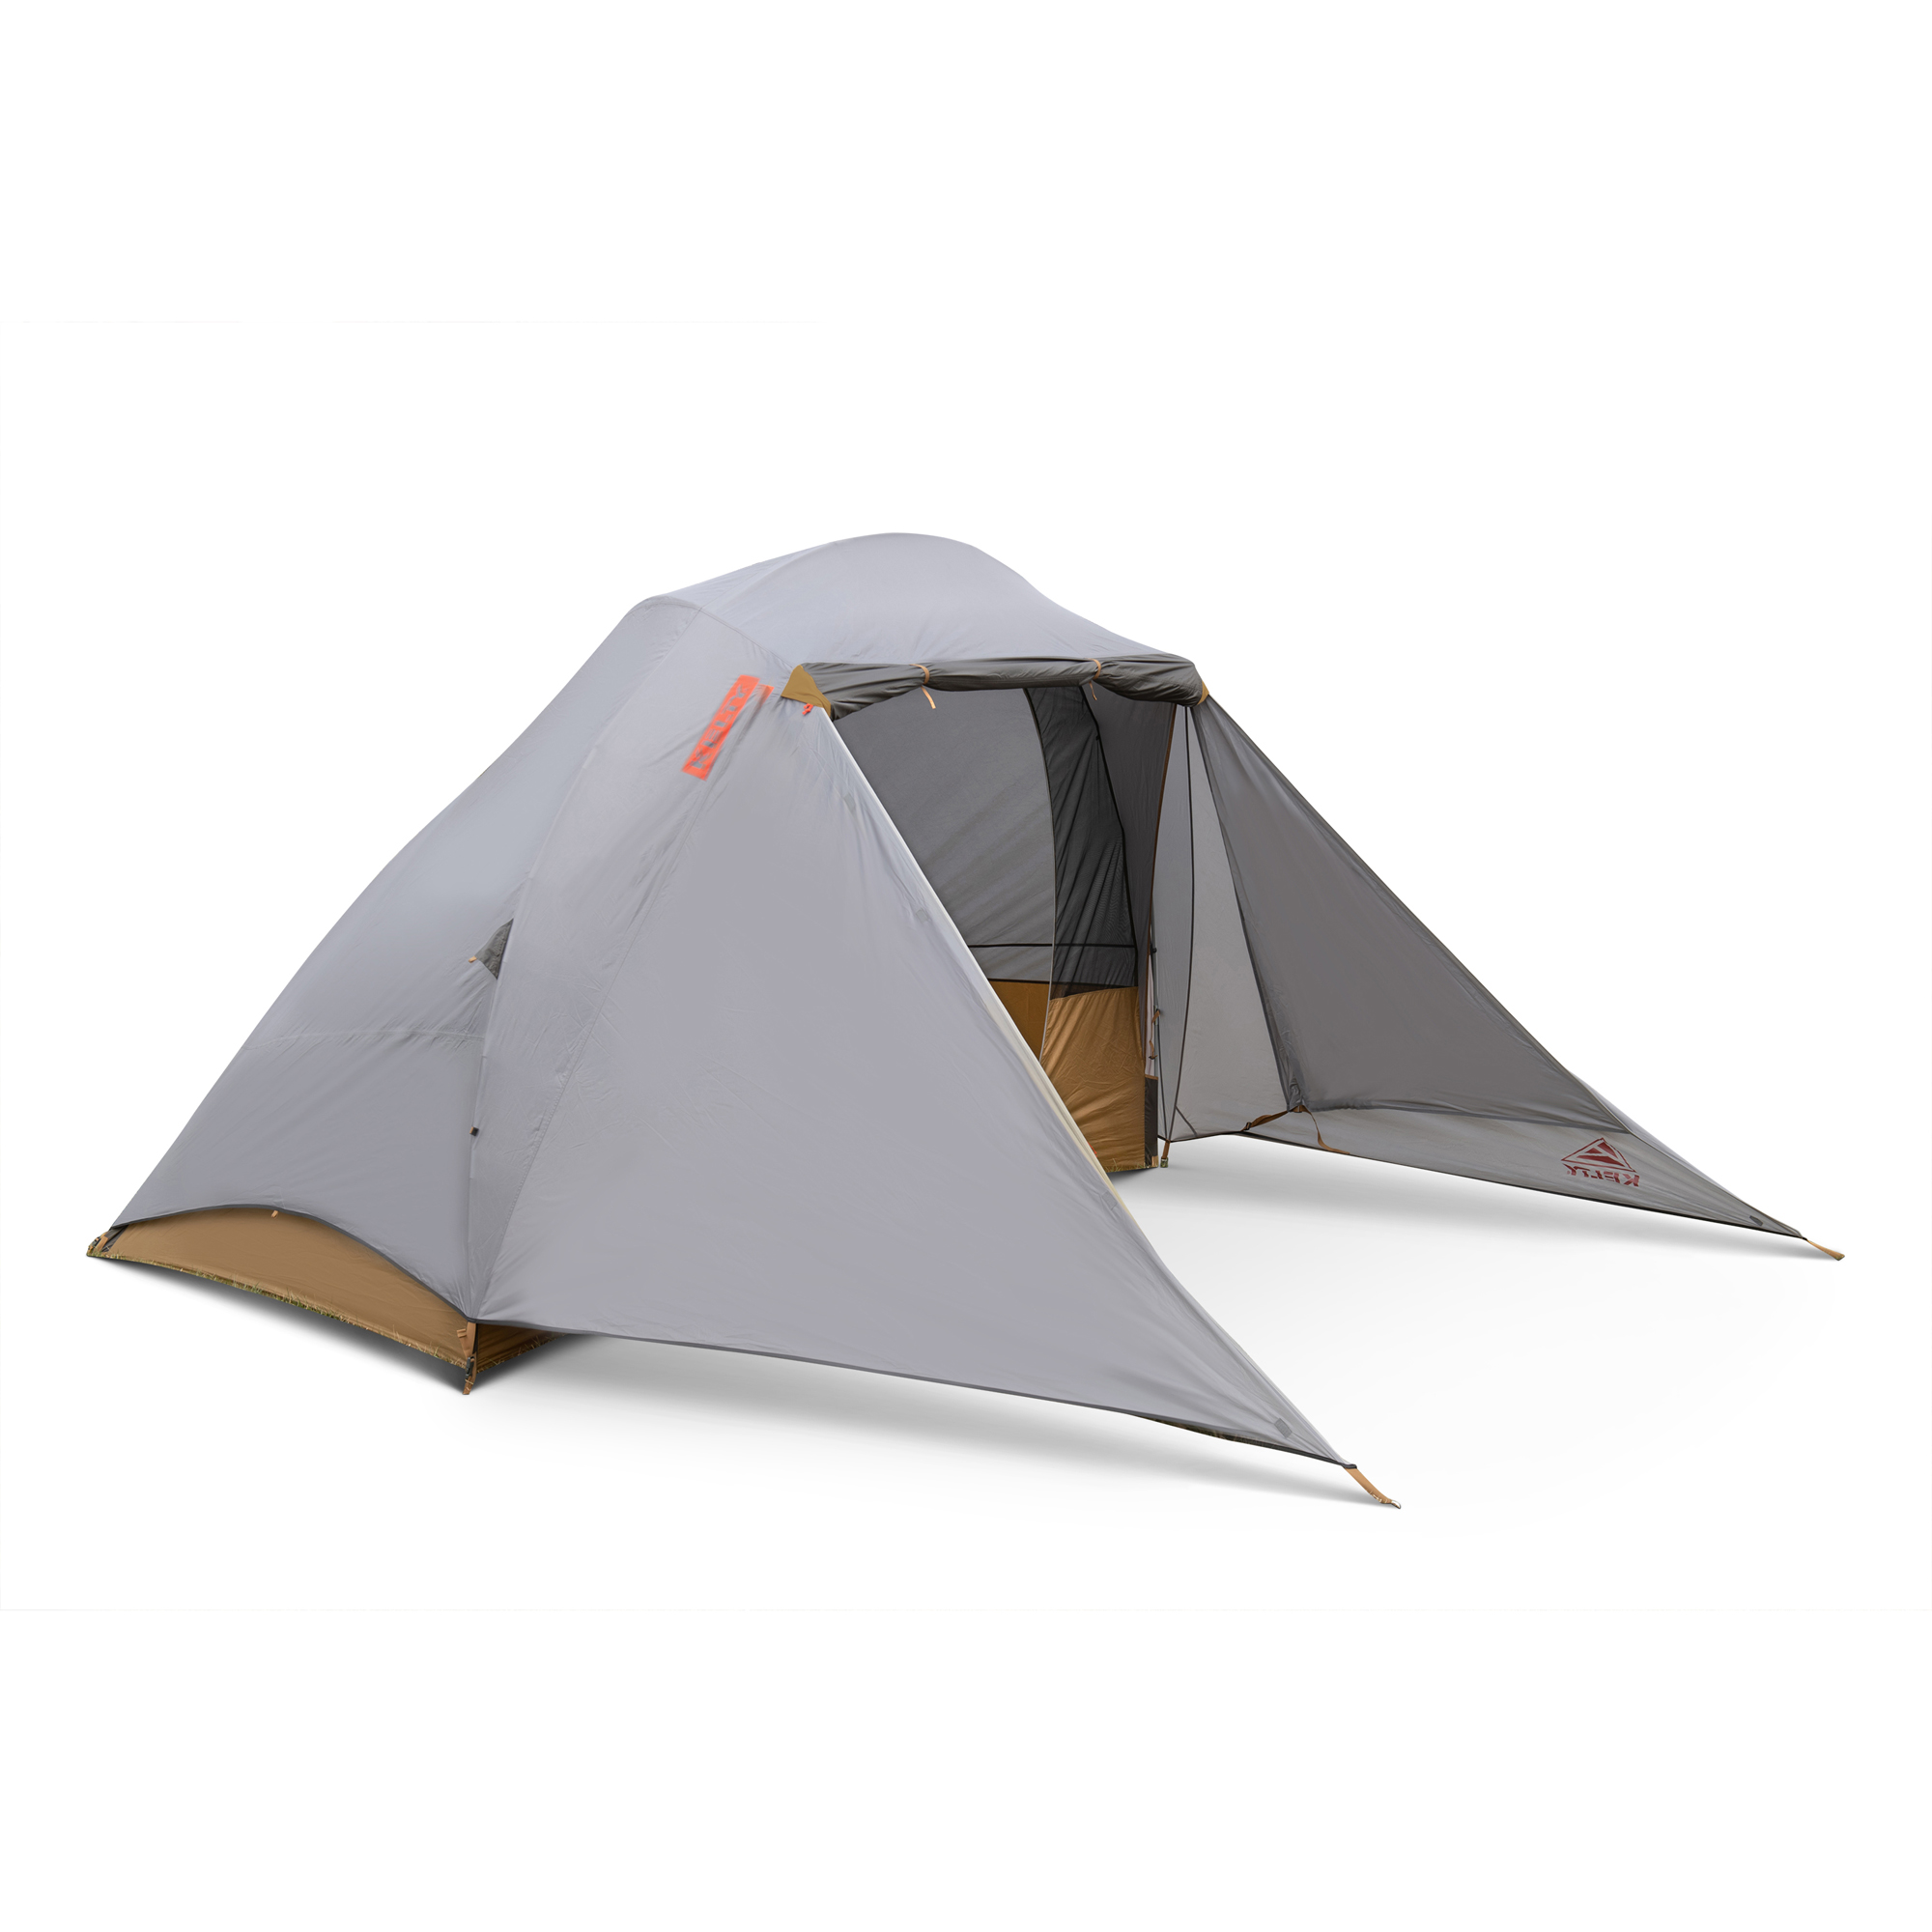 Kelty Caboose 4-Person Camping Tent